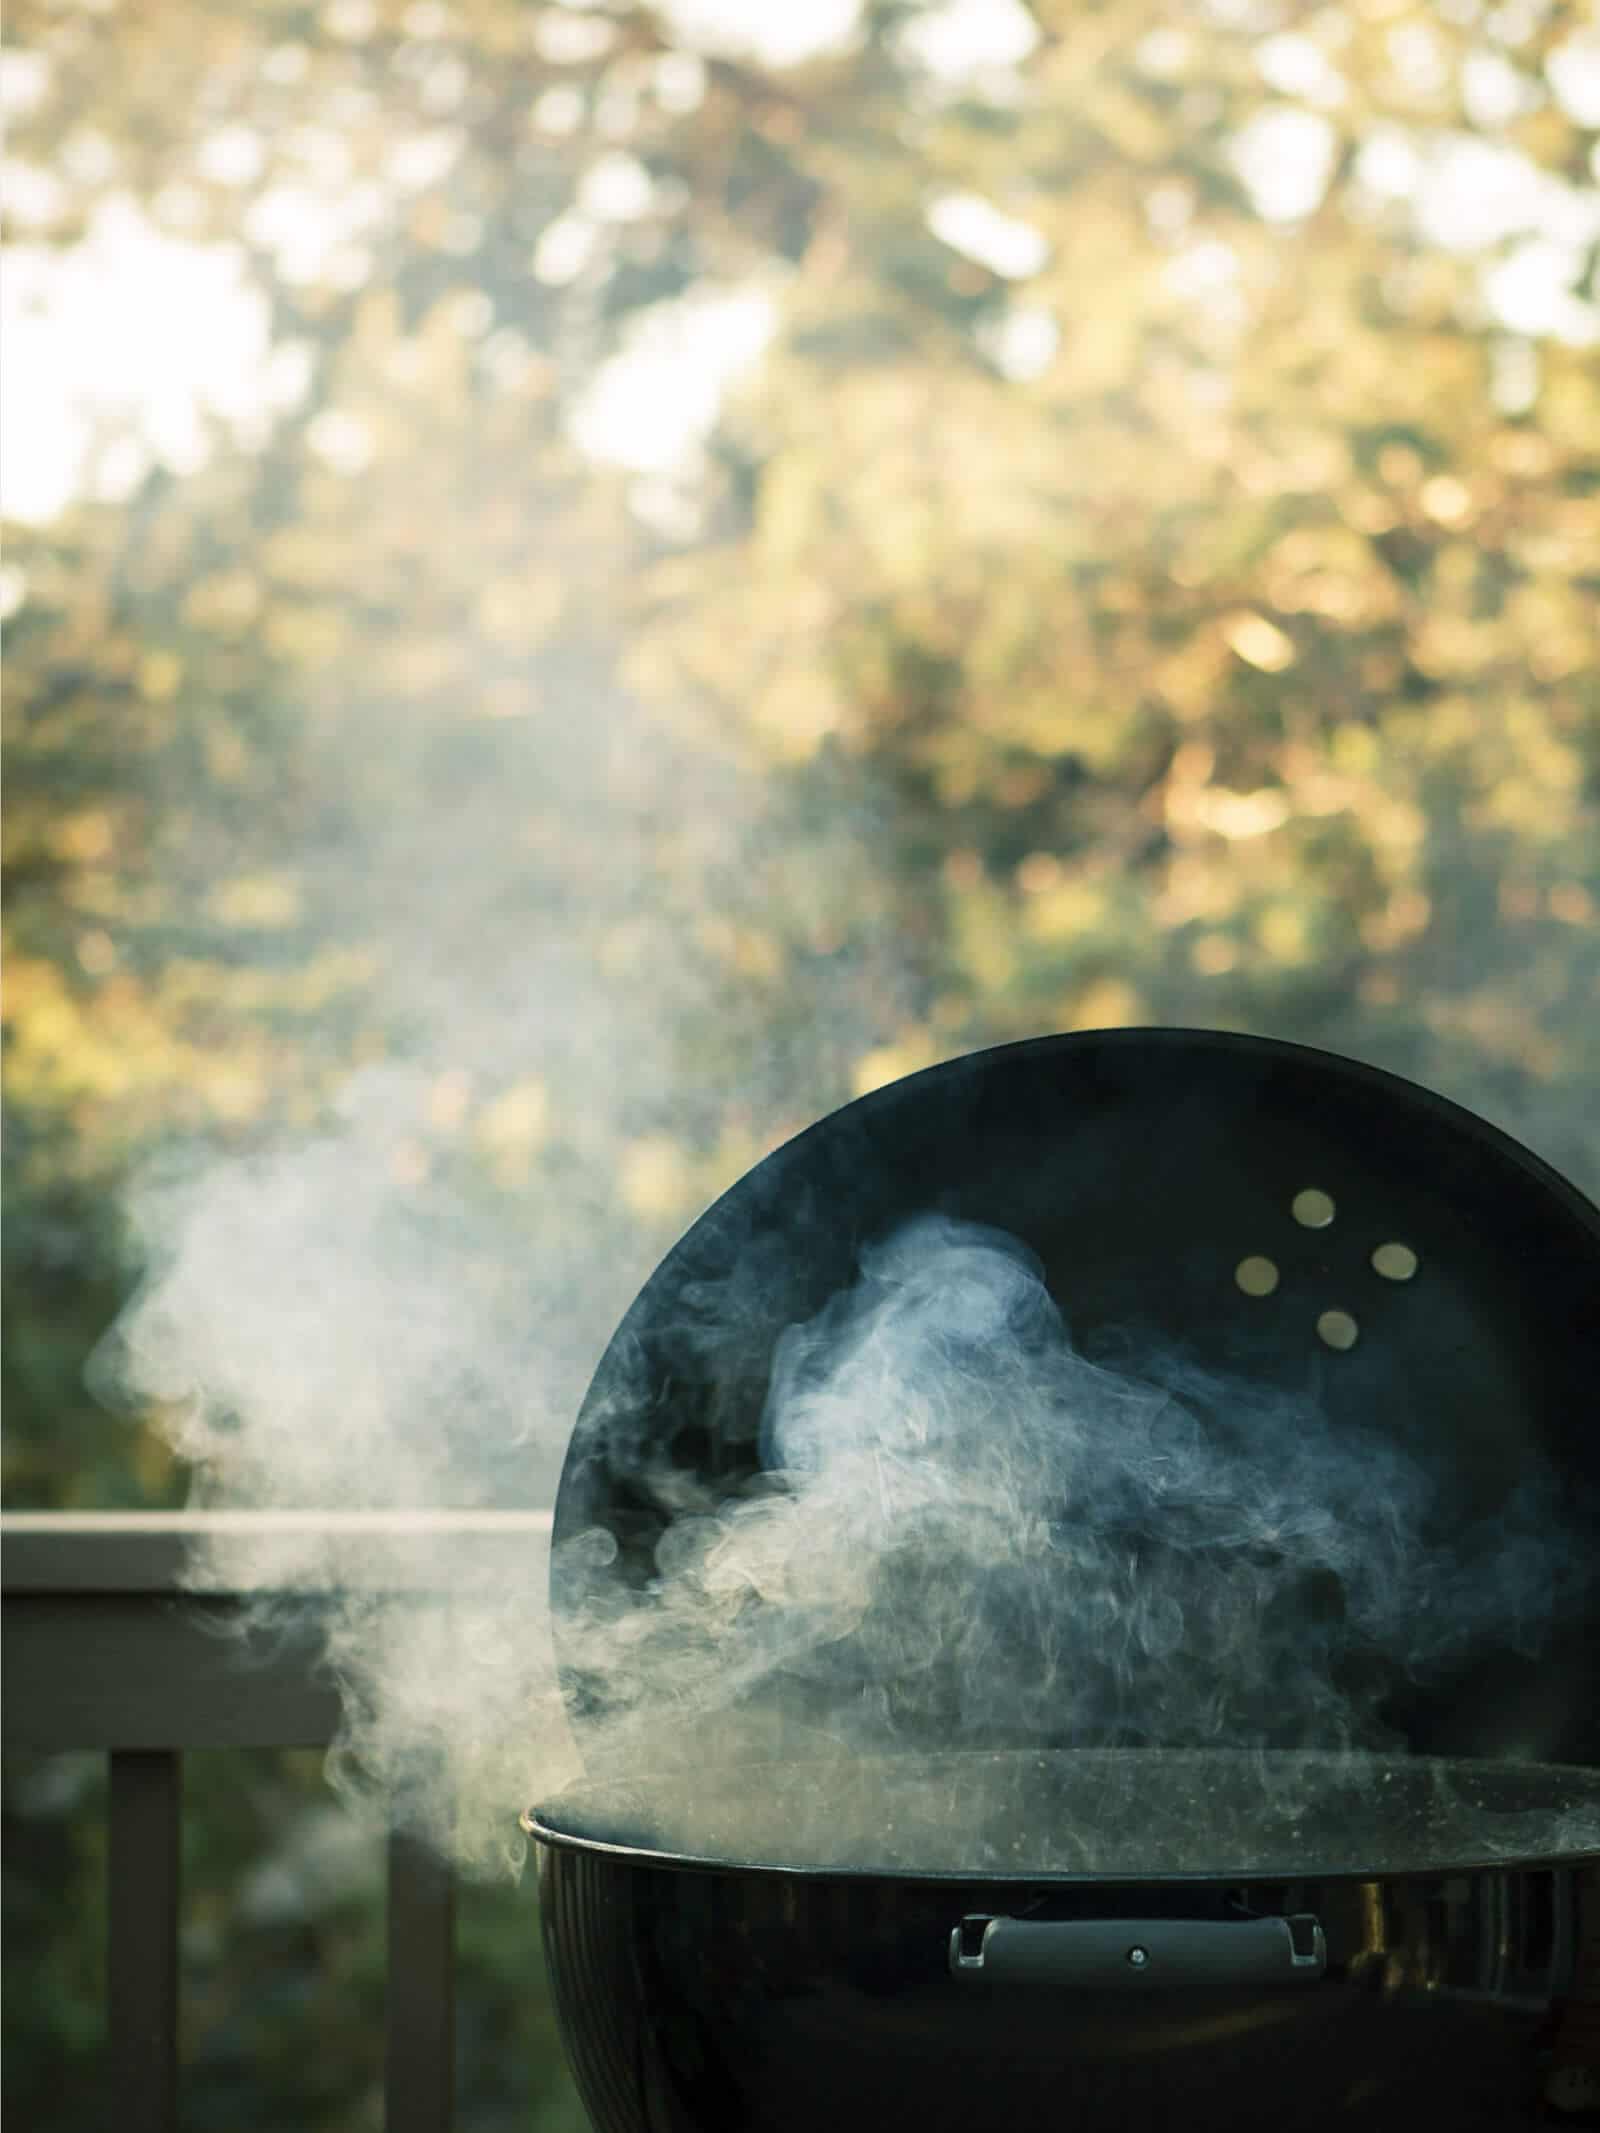 Harness the fun, flavor, and power of wood smoke and fire for your outdoor meals